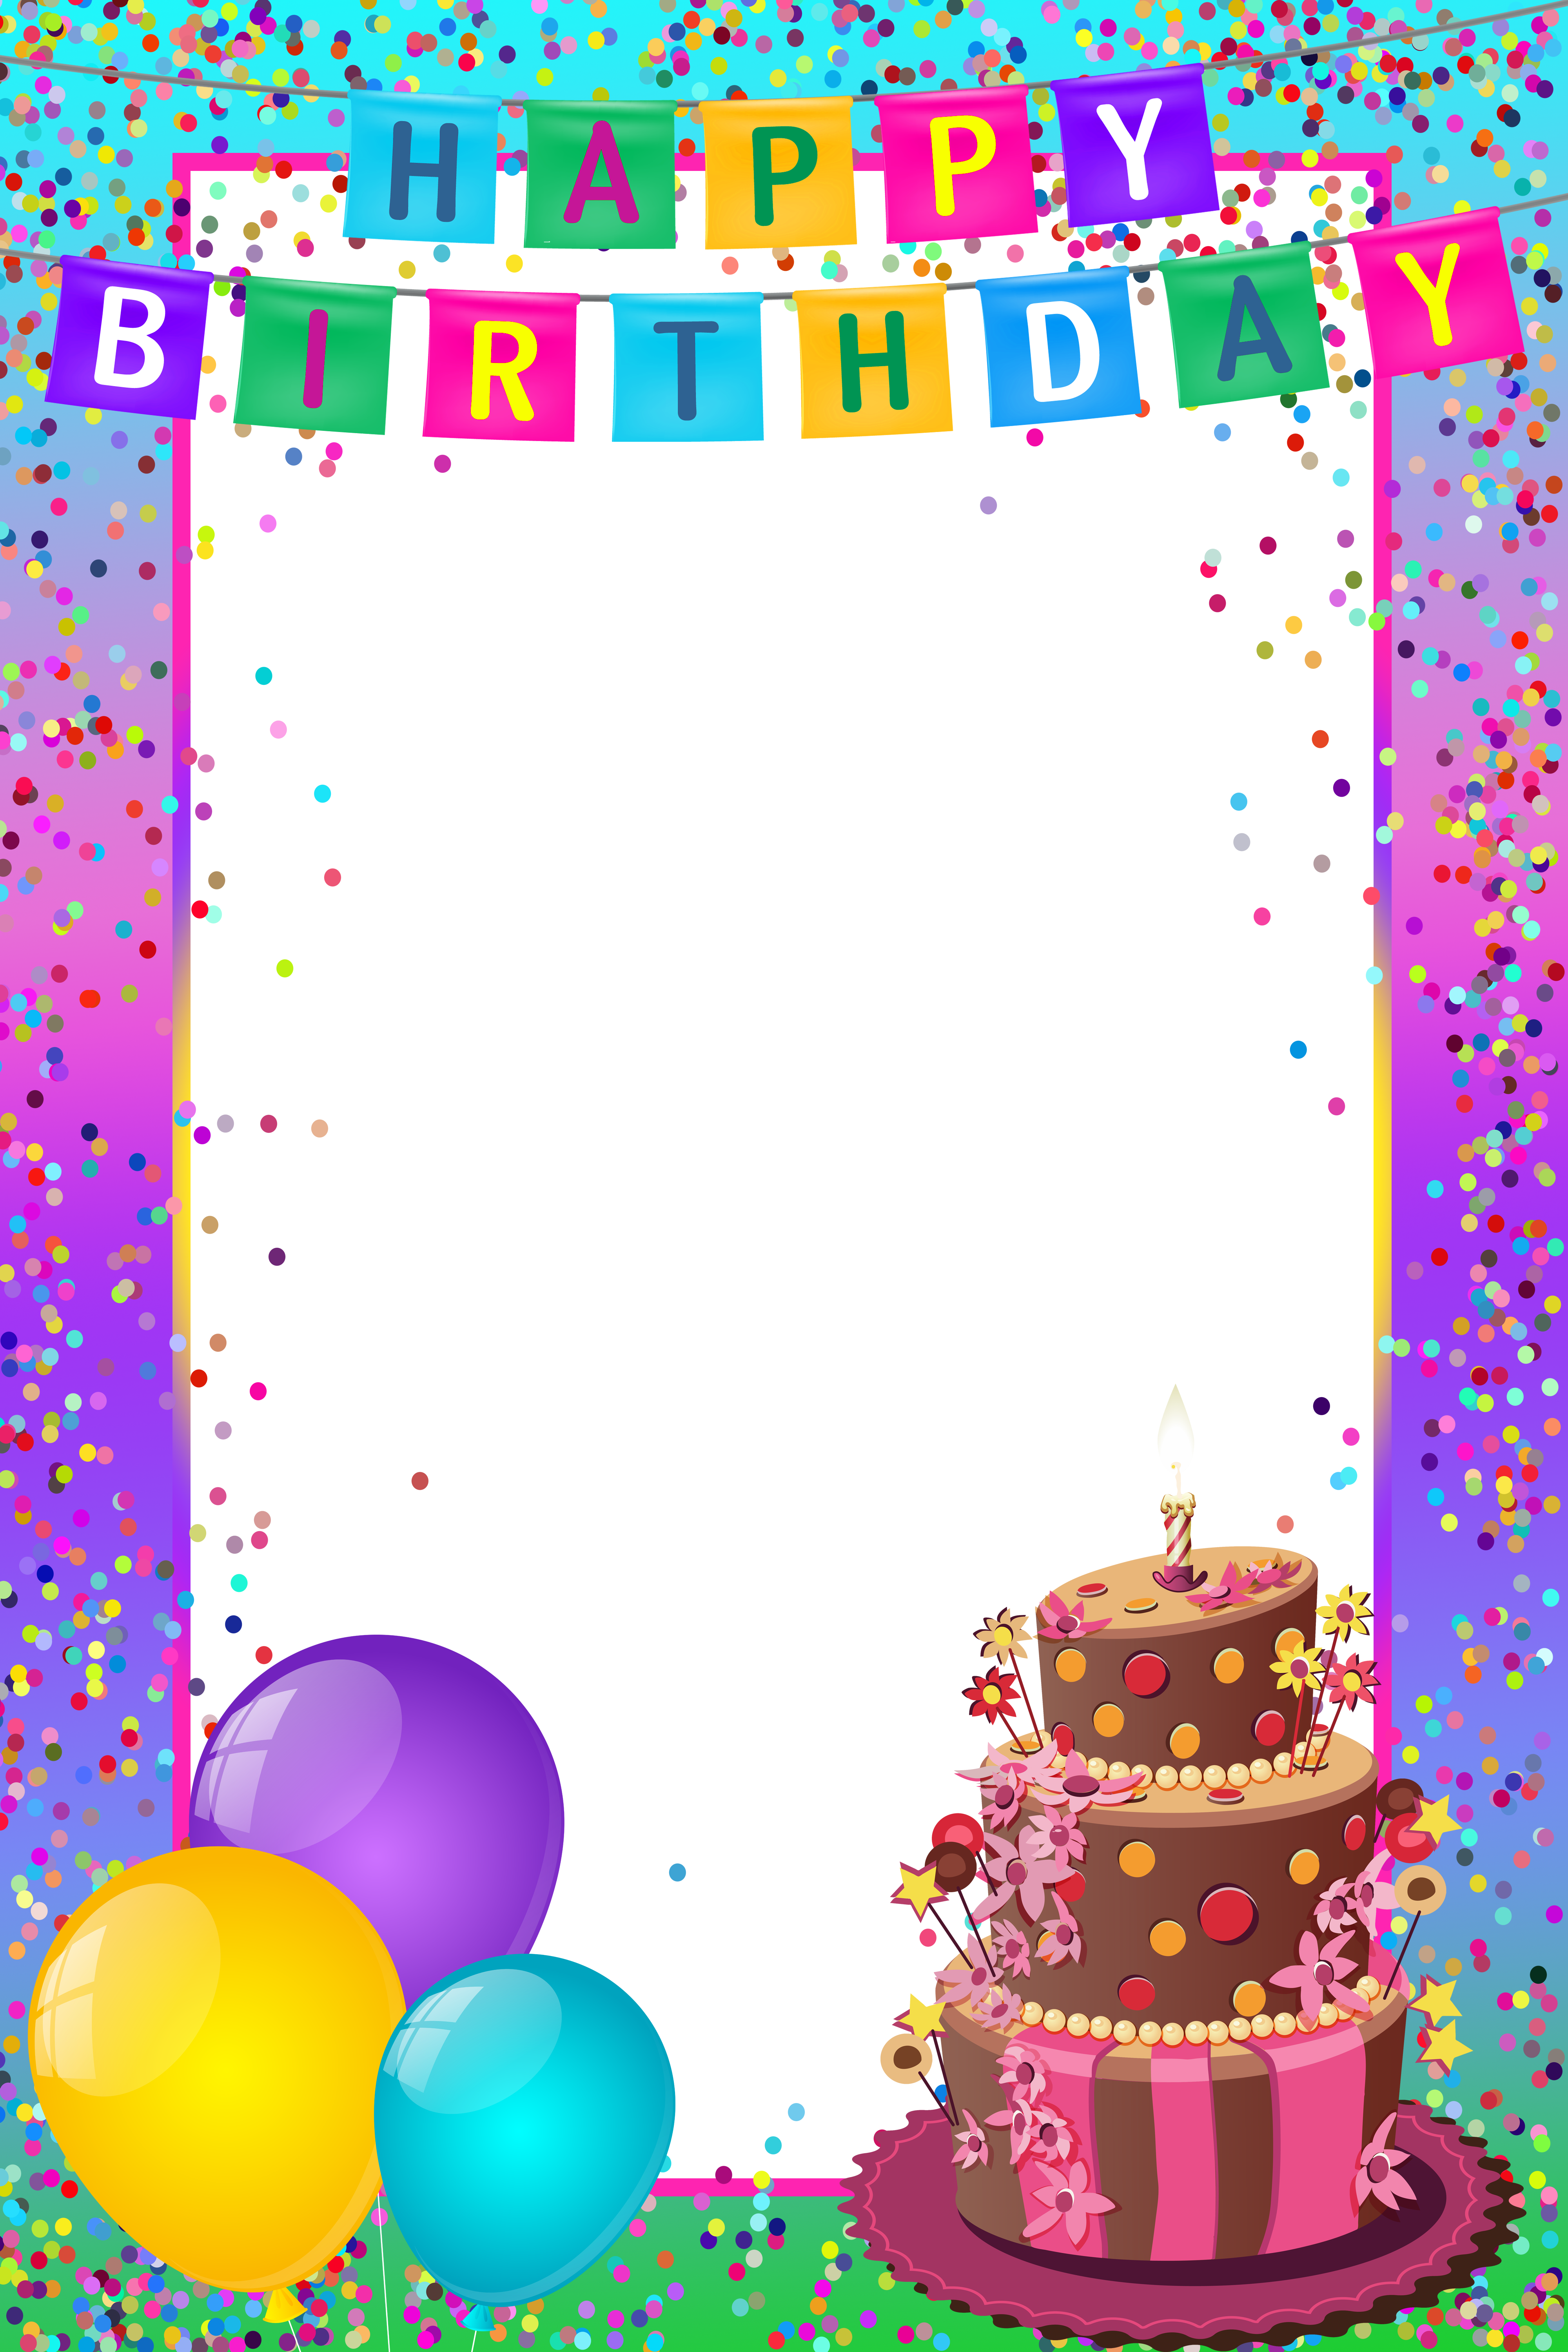 birthday frames and borders